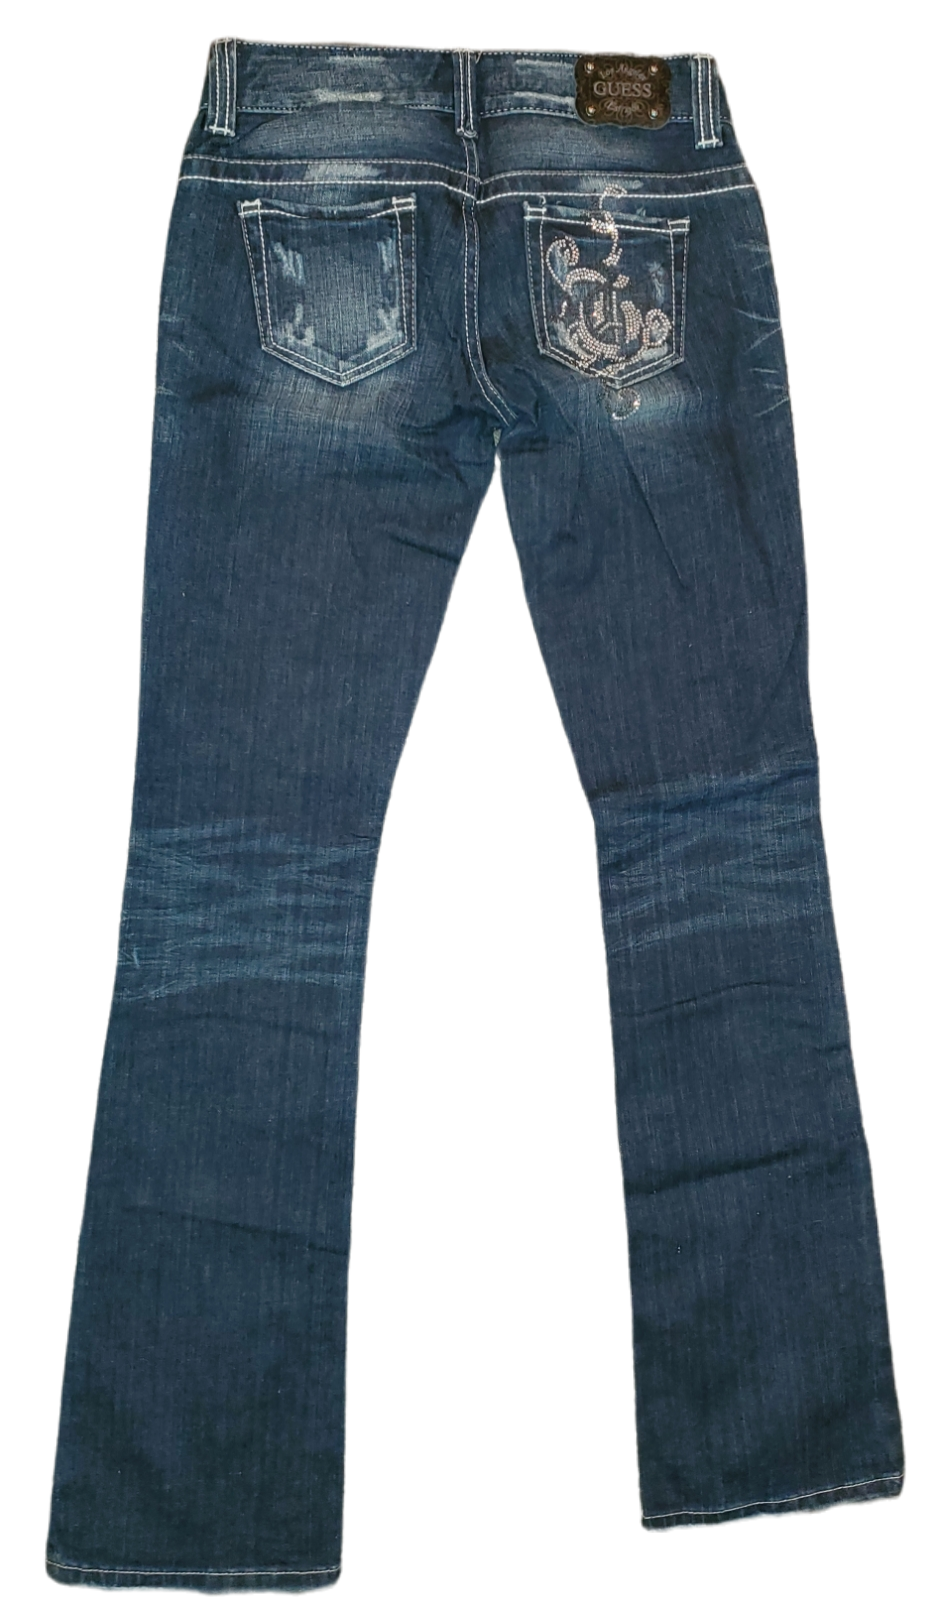 Guess Lowrise Boot Cut Jeans